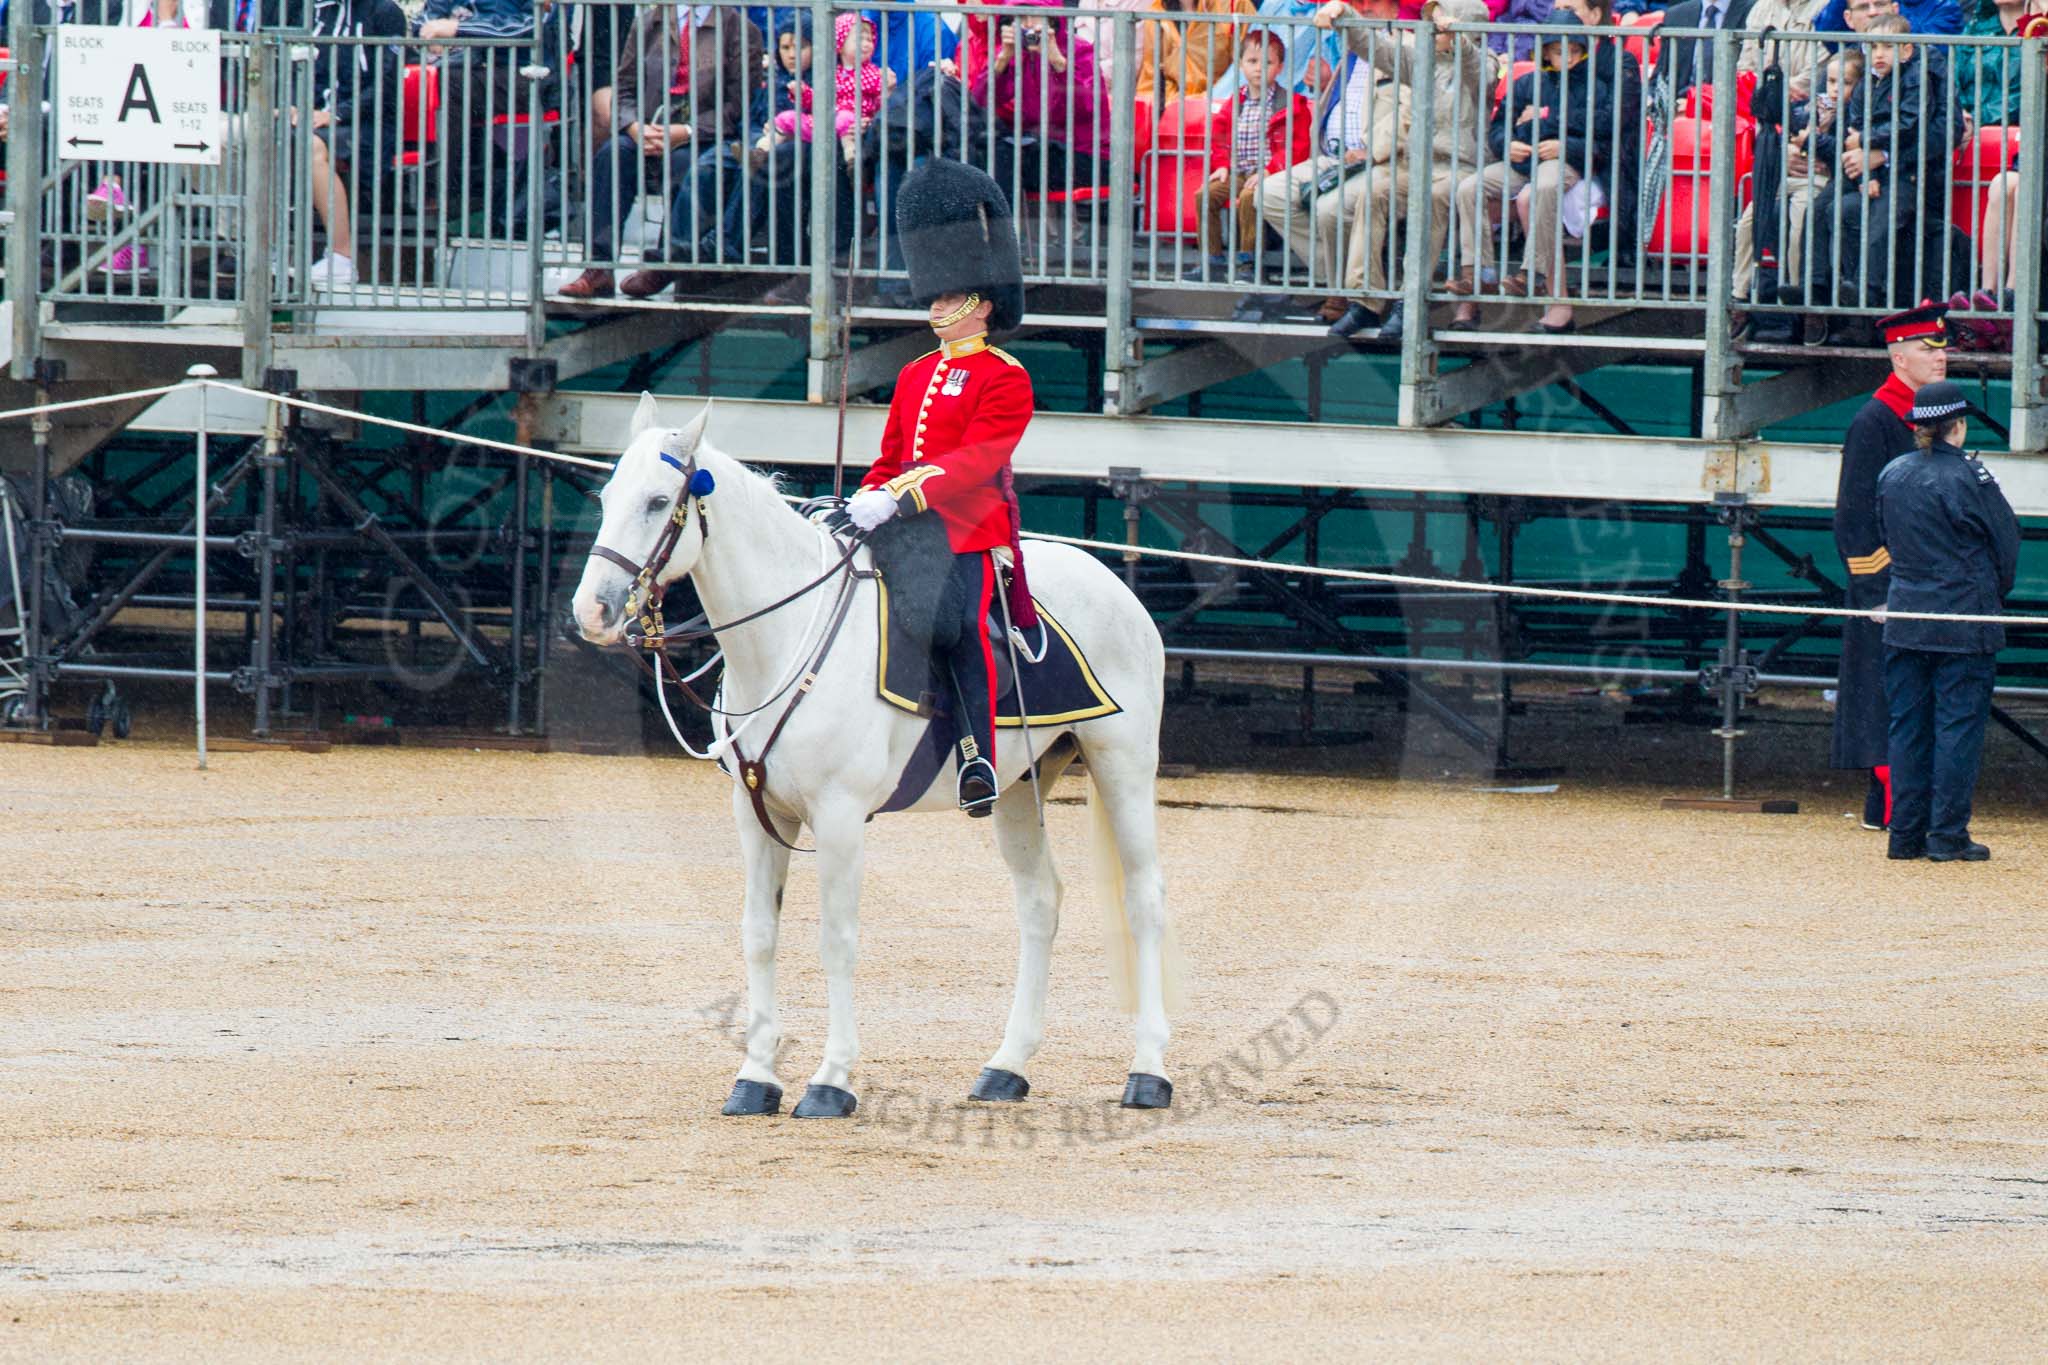 The Colonel's Review 2014.
Horse Guards Parade, Westminster,
London,

United Kingdom,
on 07 June 2014 at 11:22, image #415